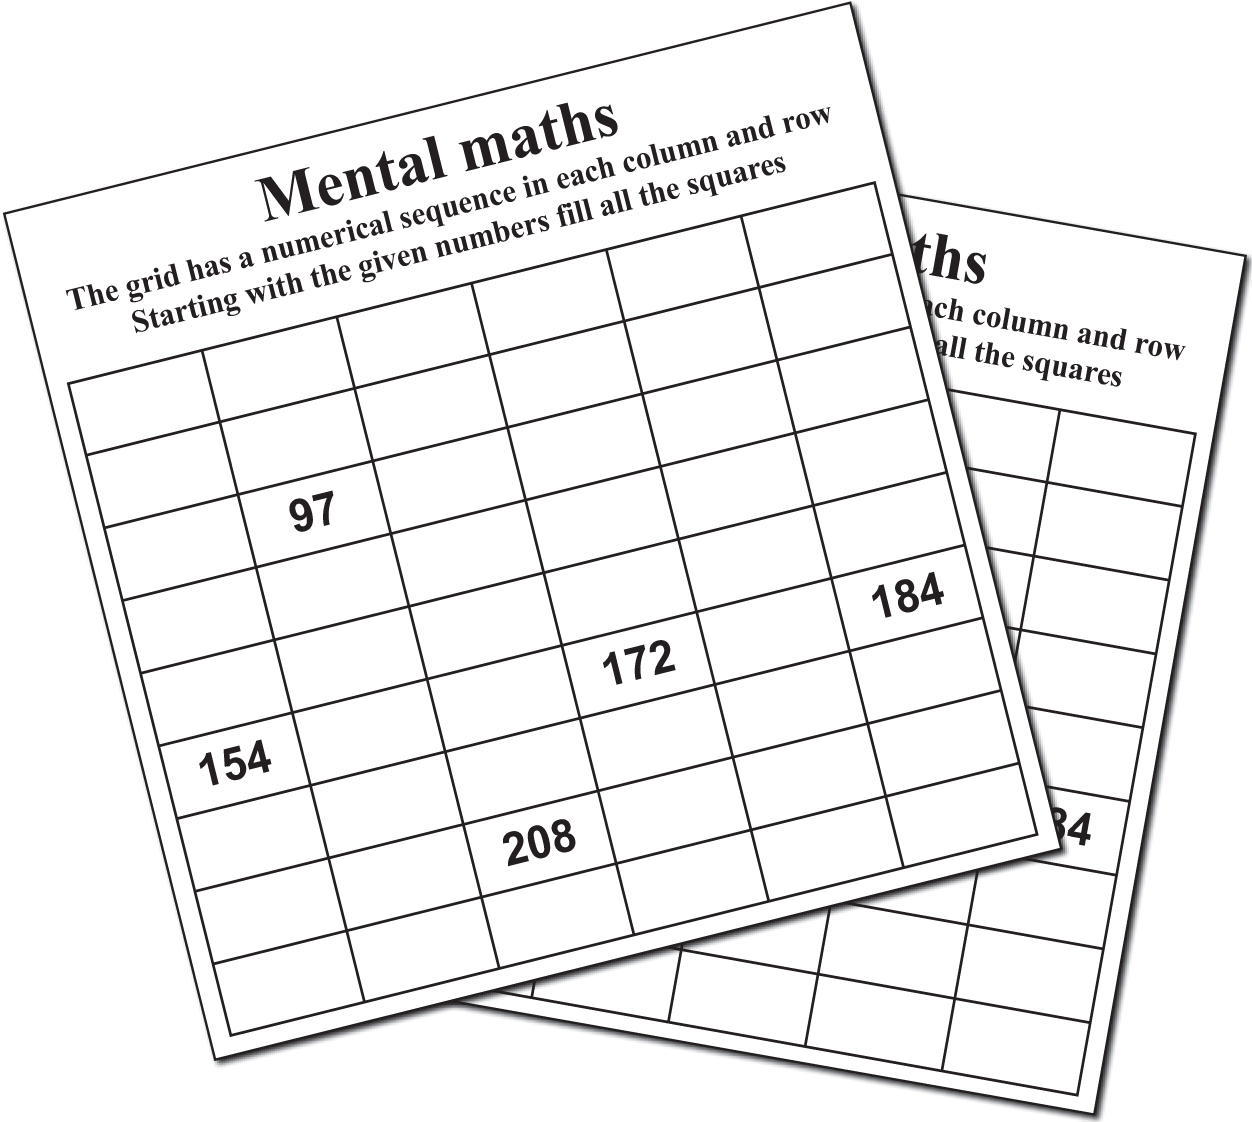 Thumbnail for 20 MENTAL MATHS PUZZLE BOOKLET 01